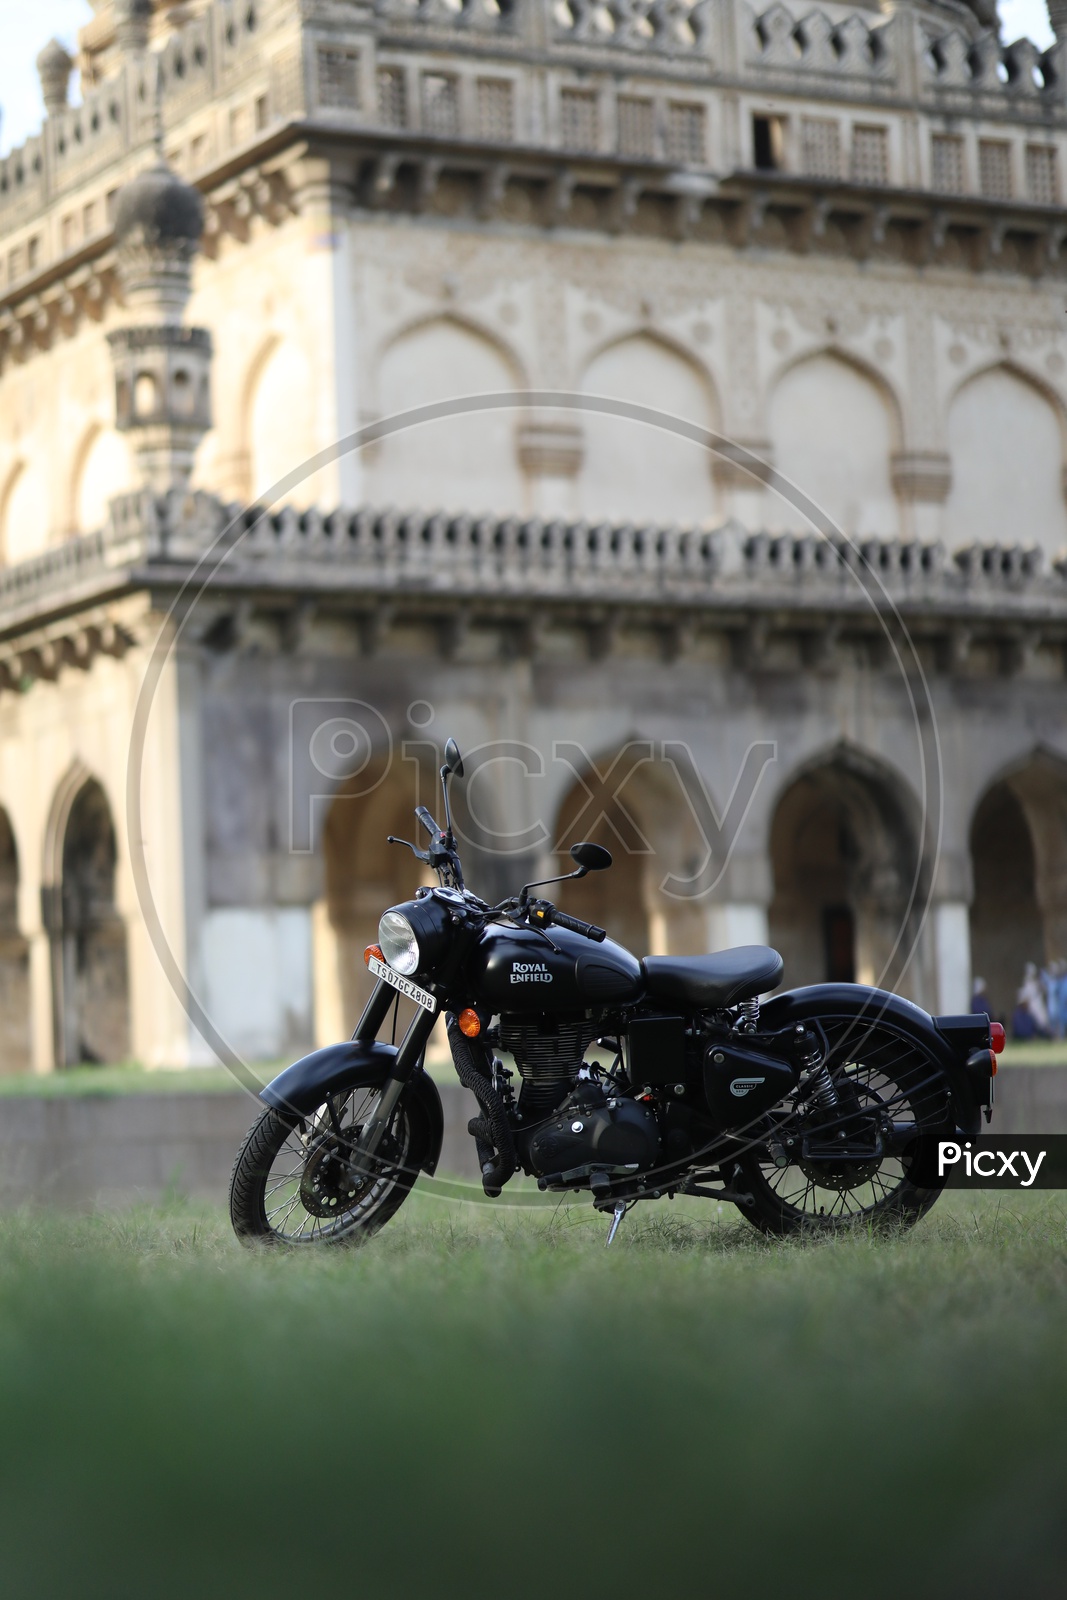 Royal Enfield Bullet 350 Classic Bike With Qutub Shahi Tomb In Background